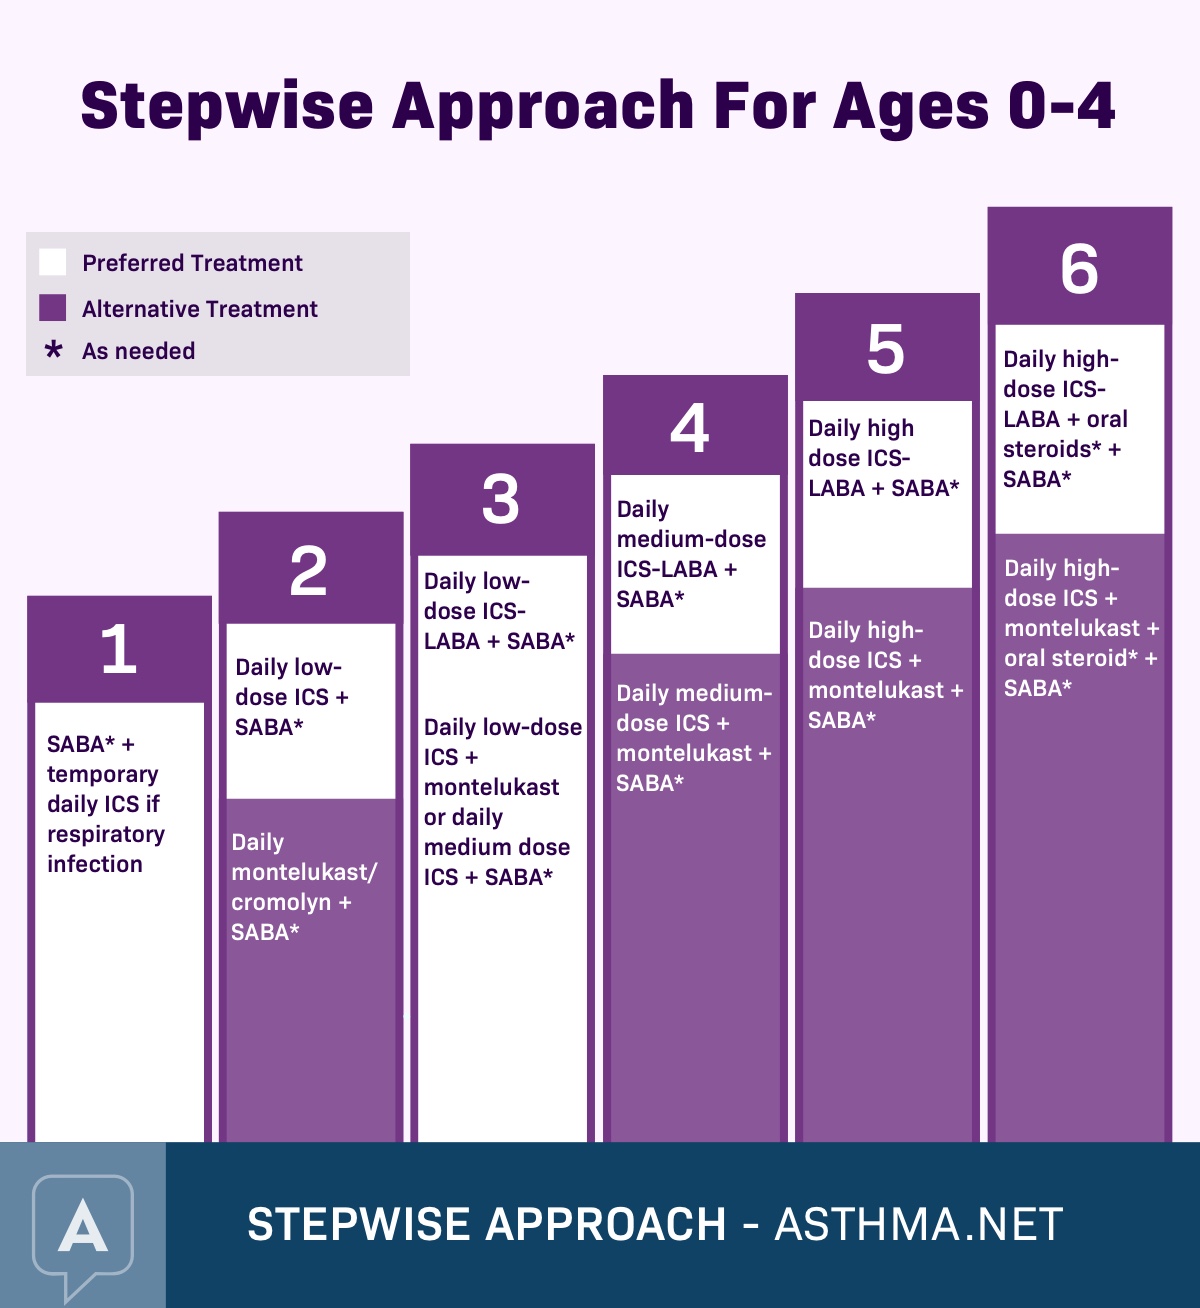 Stepwise Approach For Ages 0-4